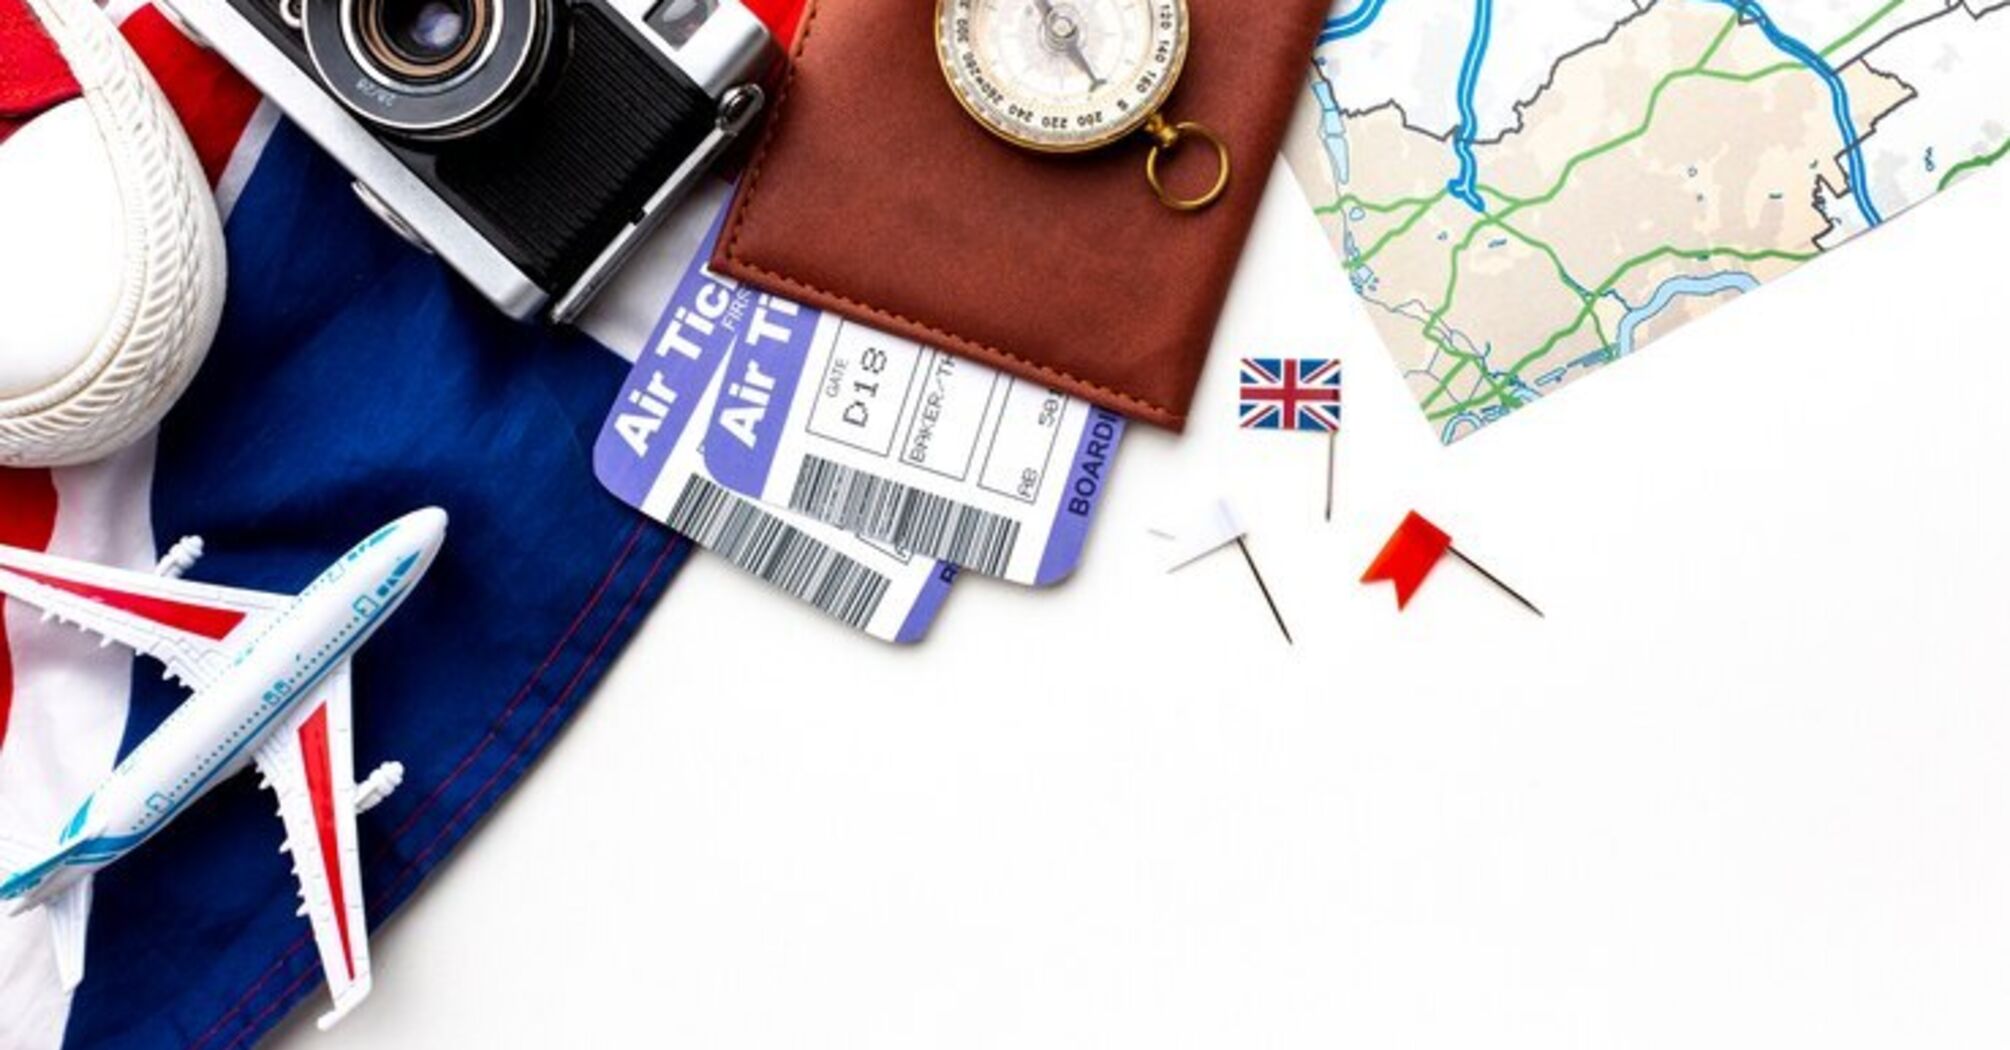 Making a passport in the UK